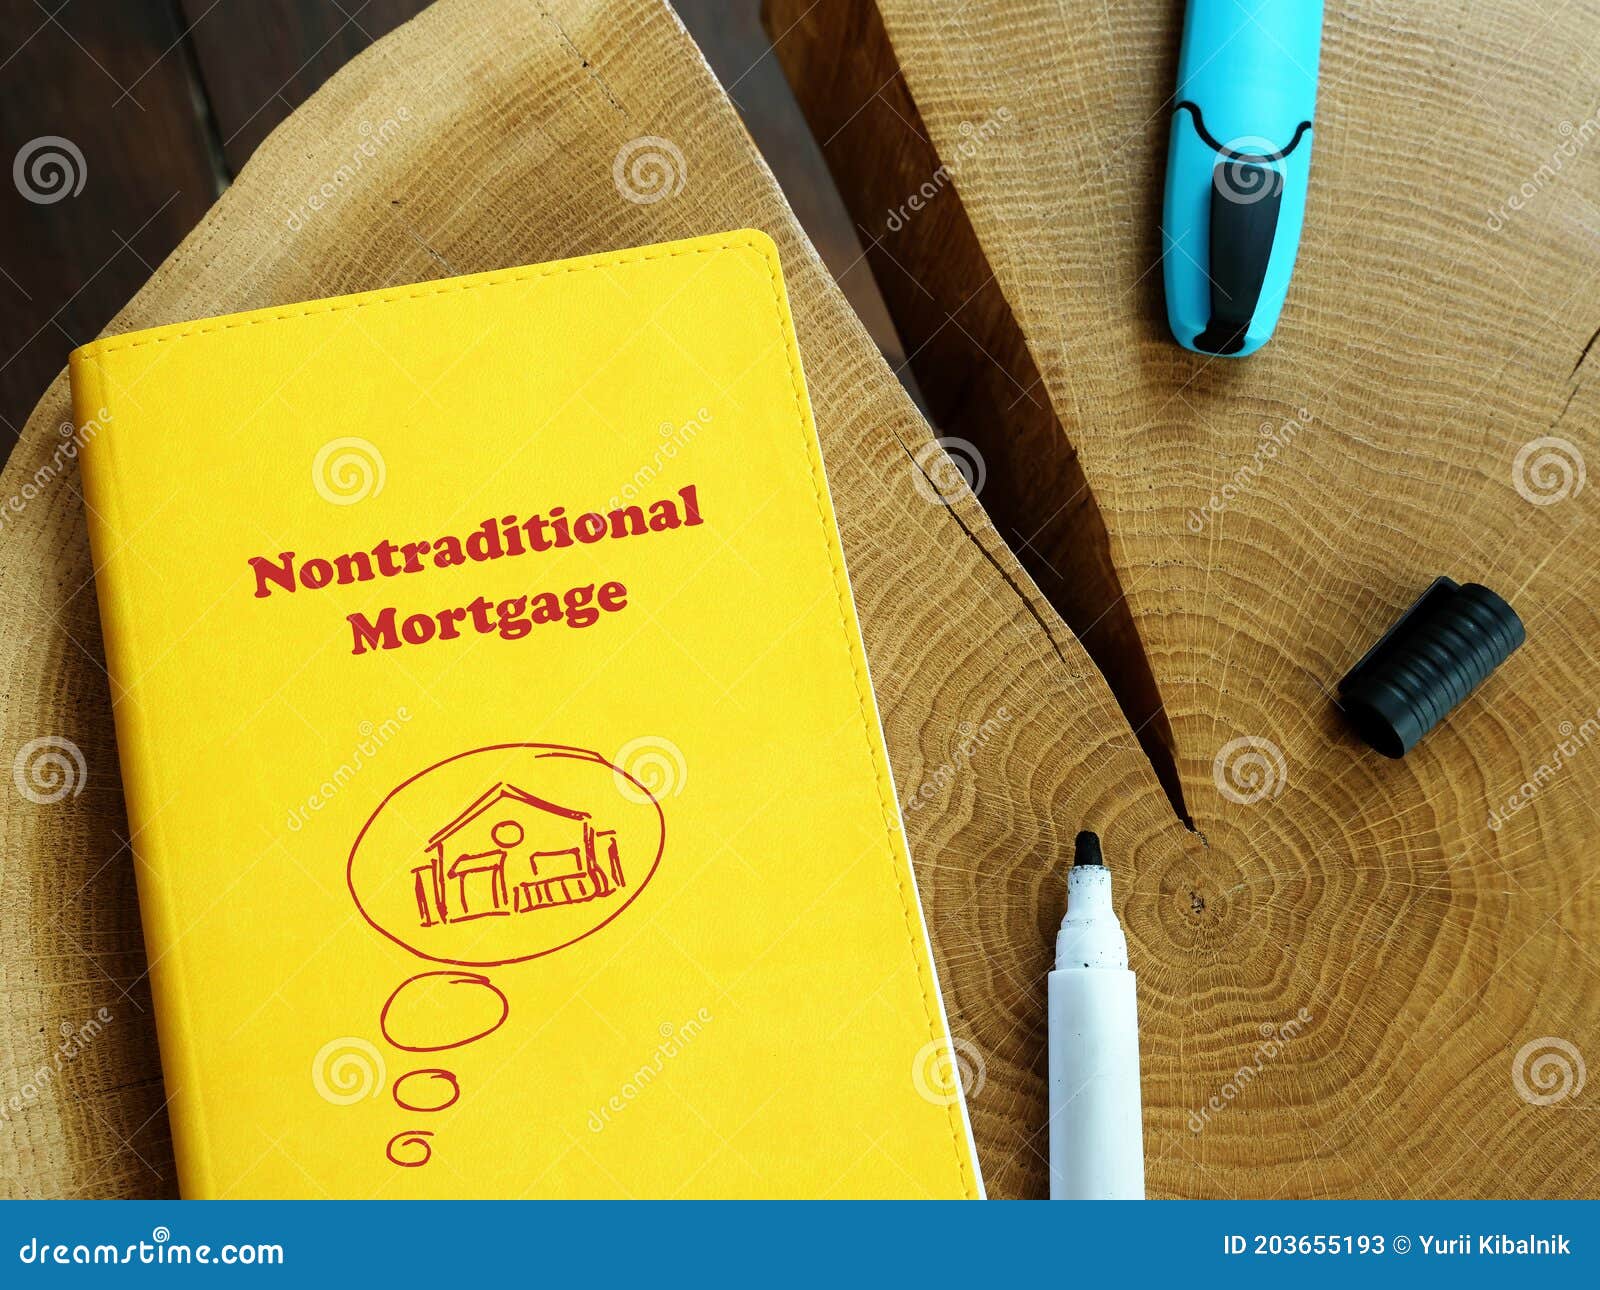 business concept meaning nontraditional mortgage with phrase on the piece of paper